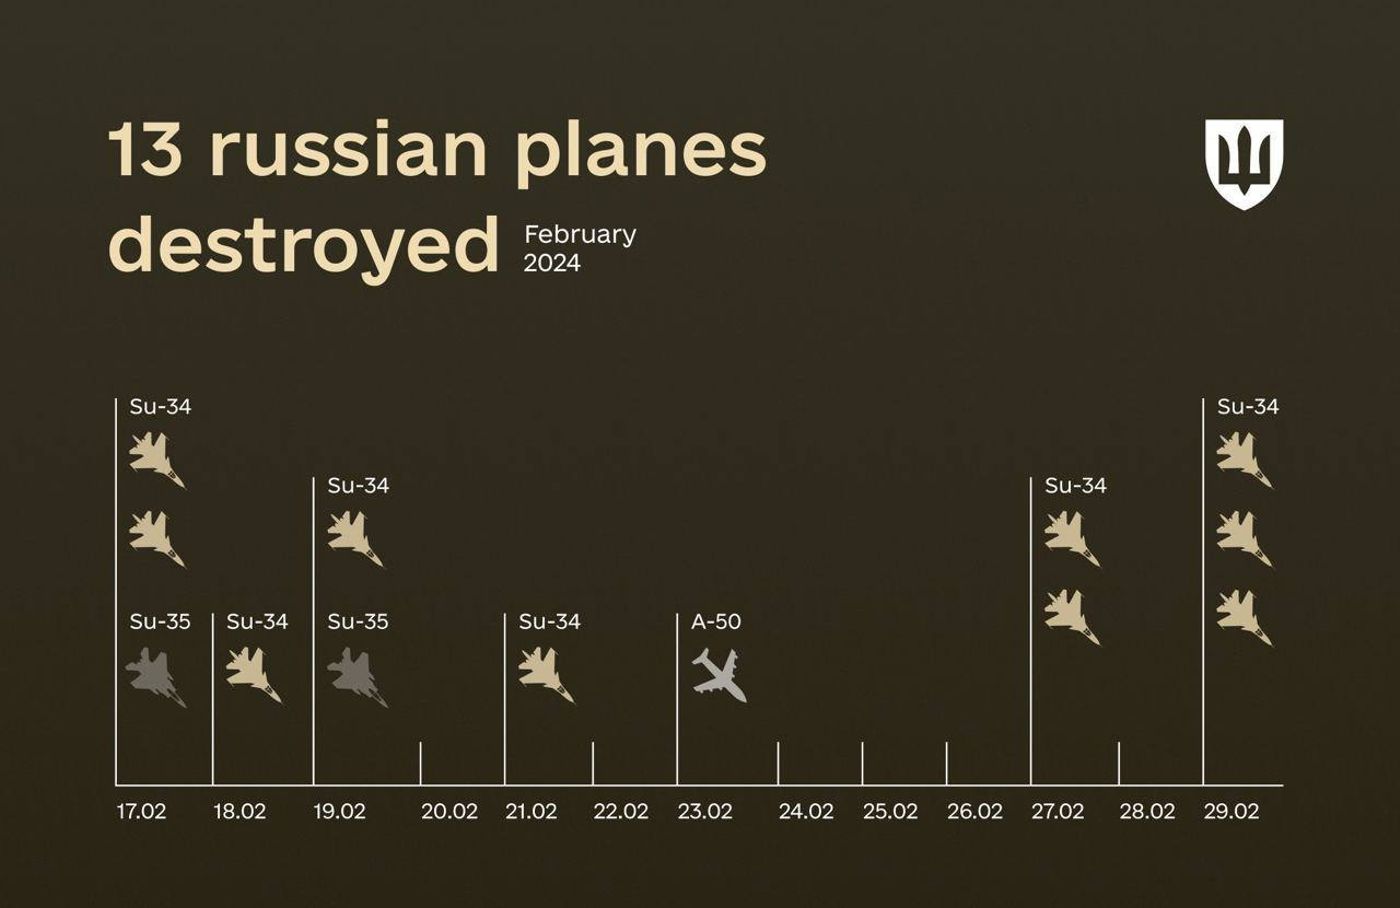 13 Russian jets lost for month Feb 2024.jpg